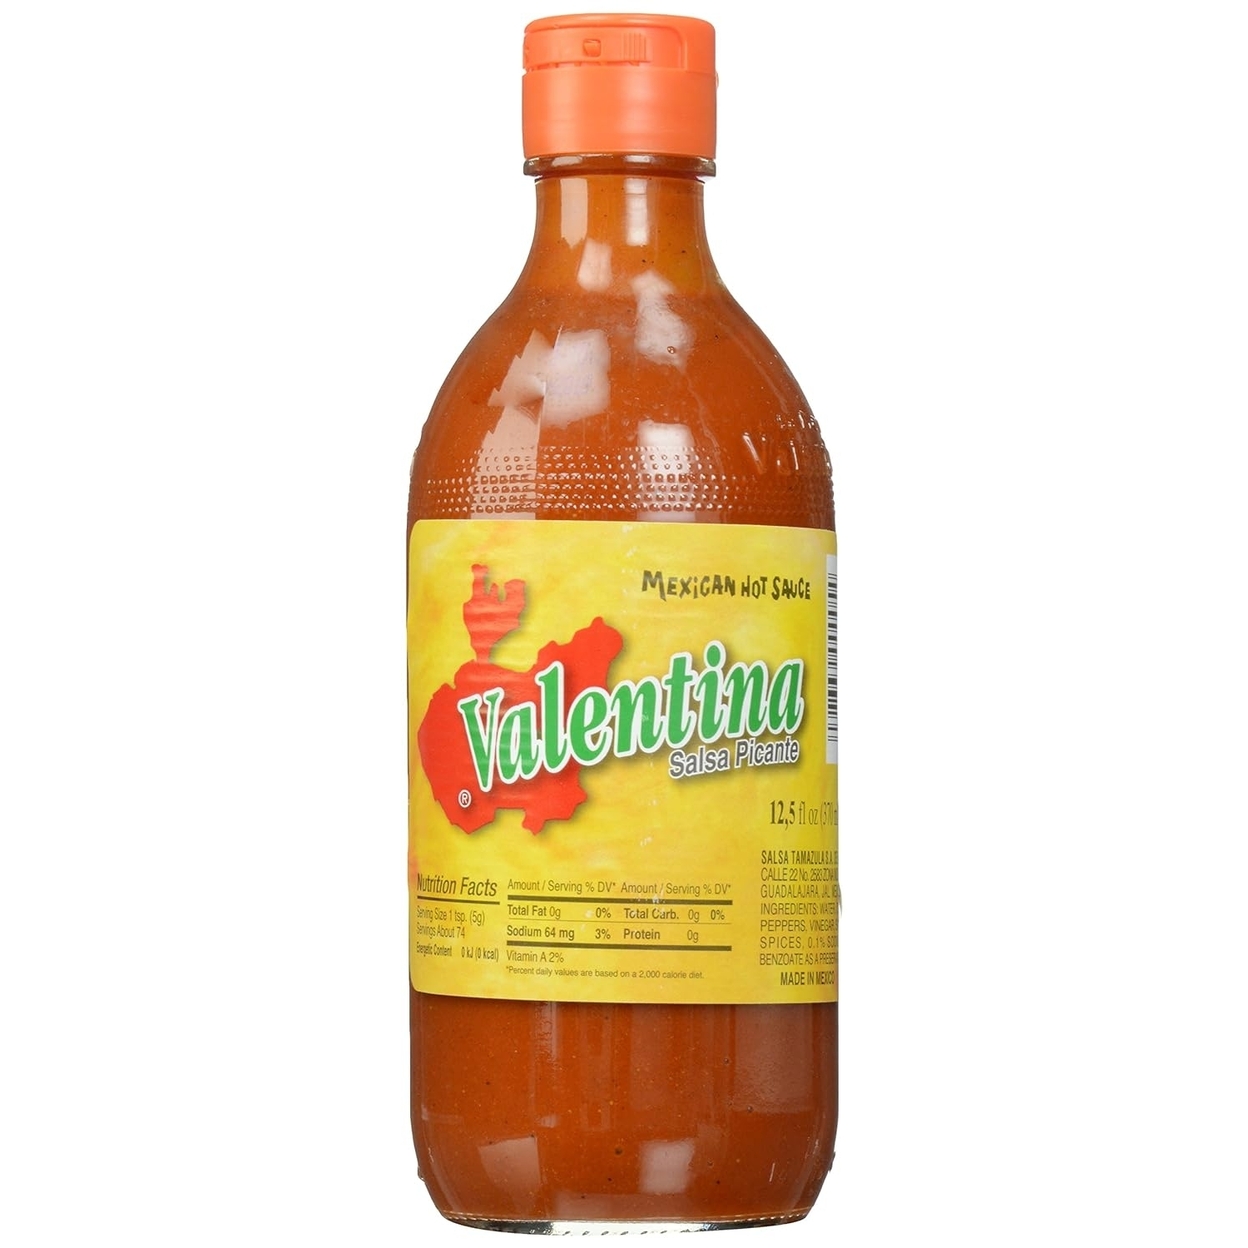 Valentina Salsa Picante Mexican Sauce 12.5 Fluid Ounce (Pack of 6) - image 1 of 5